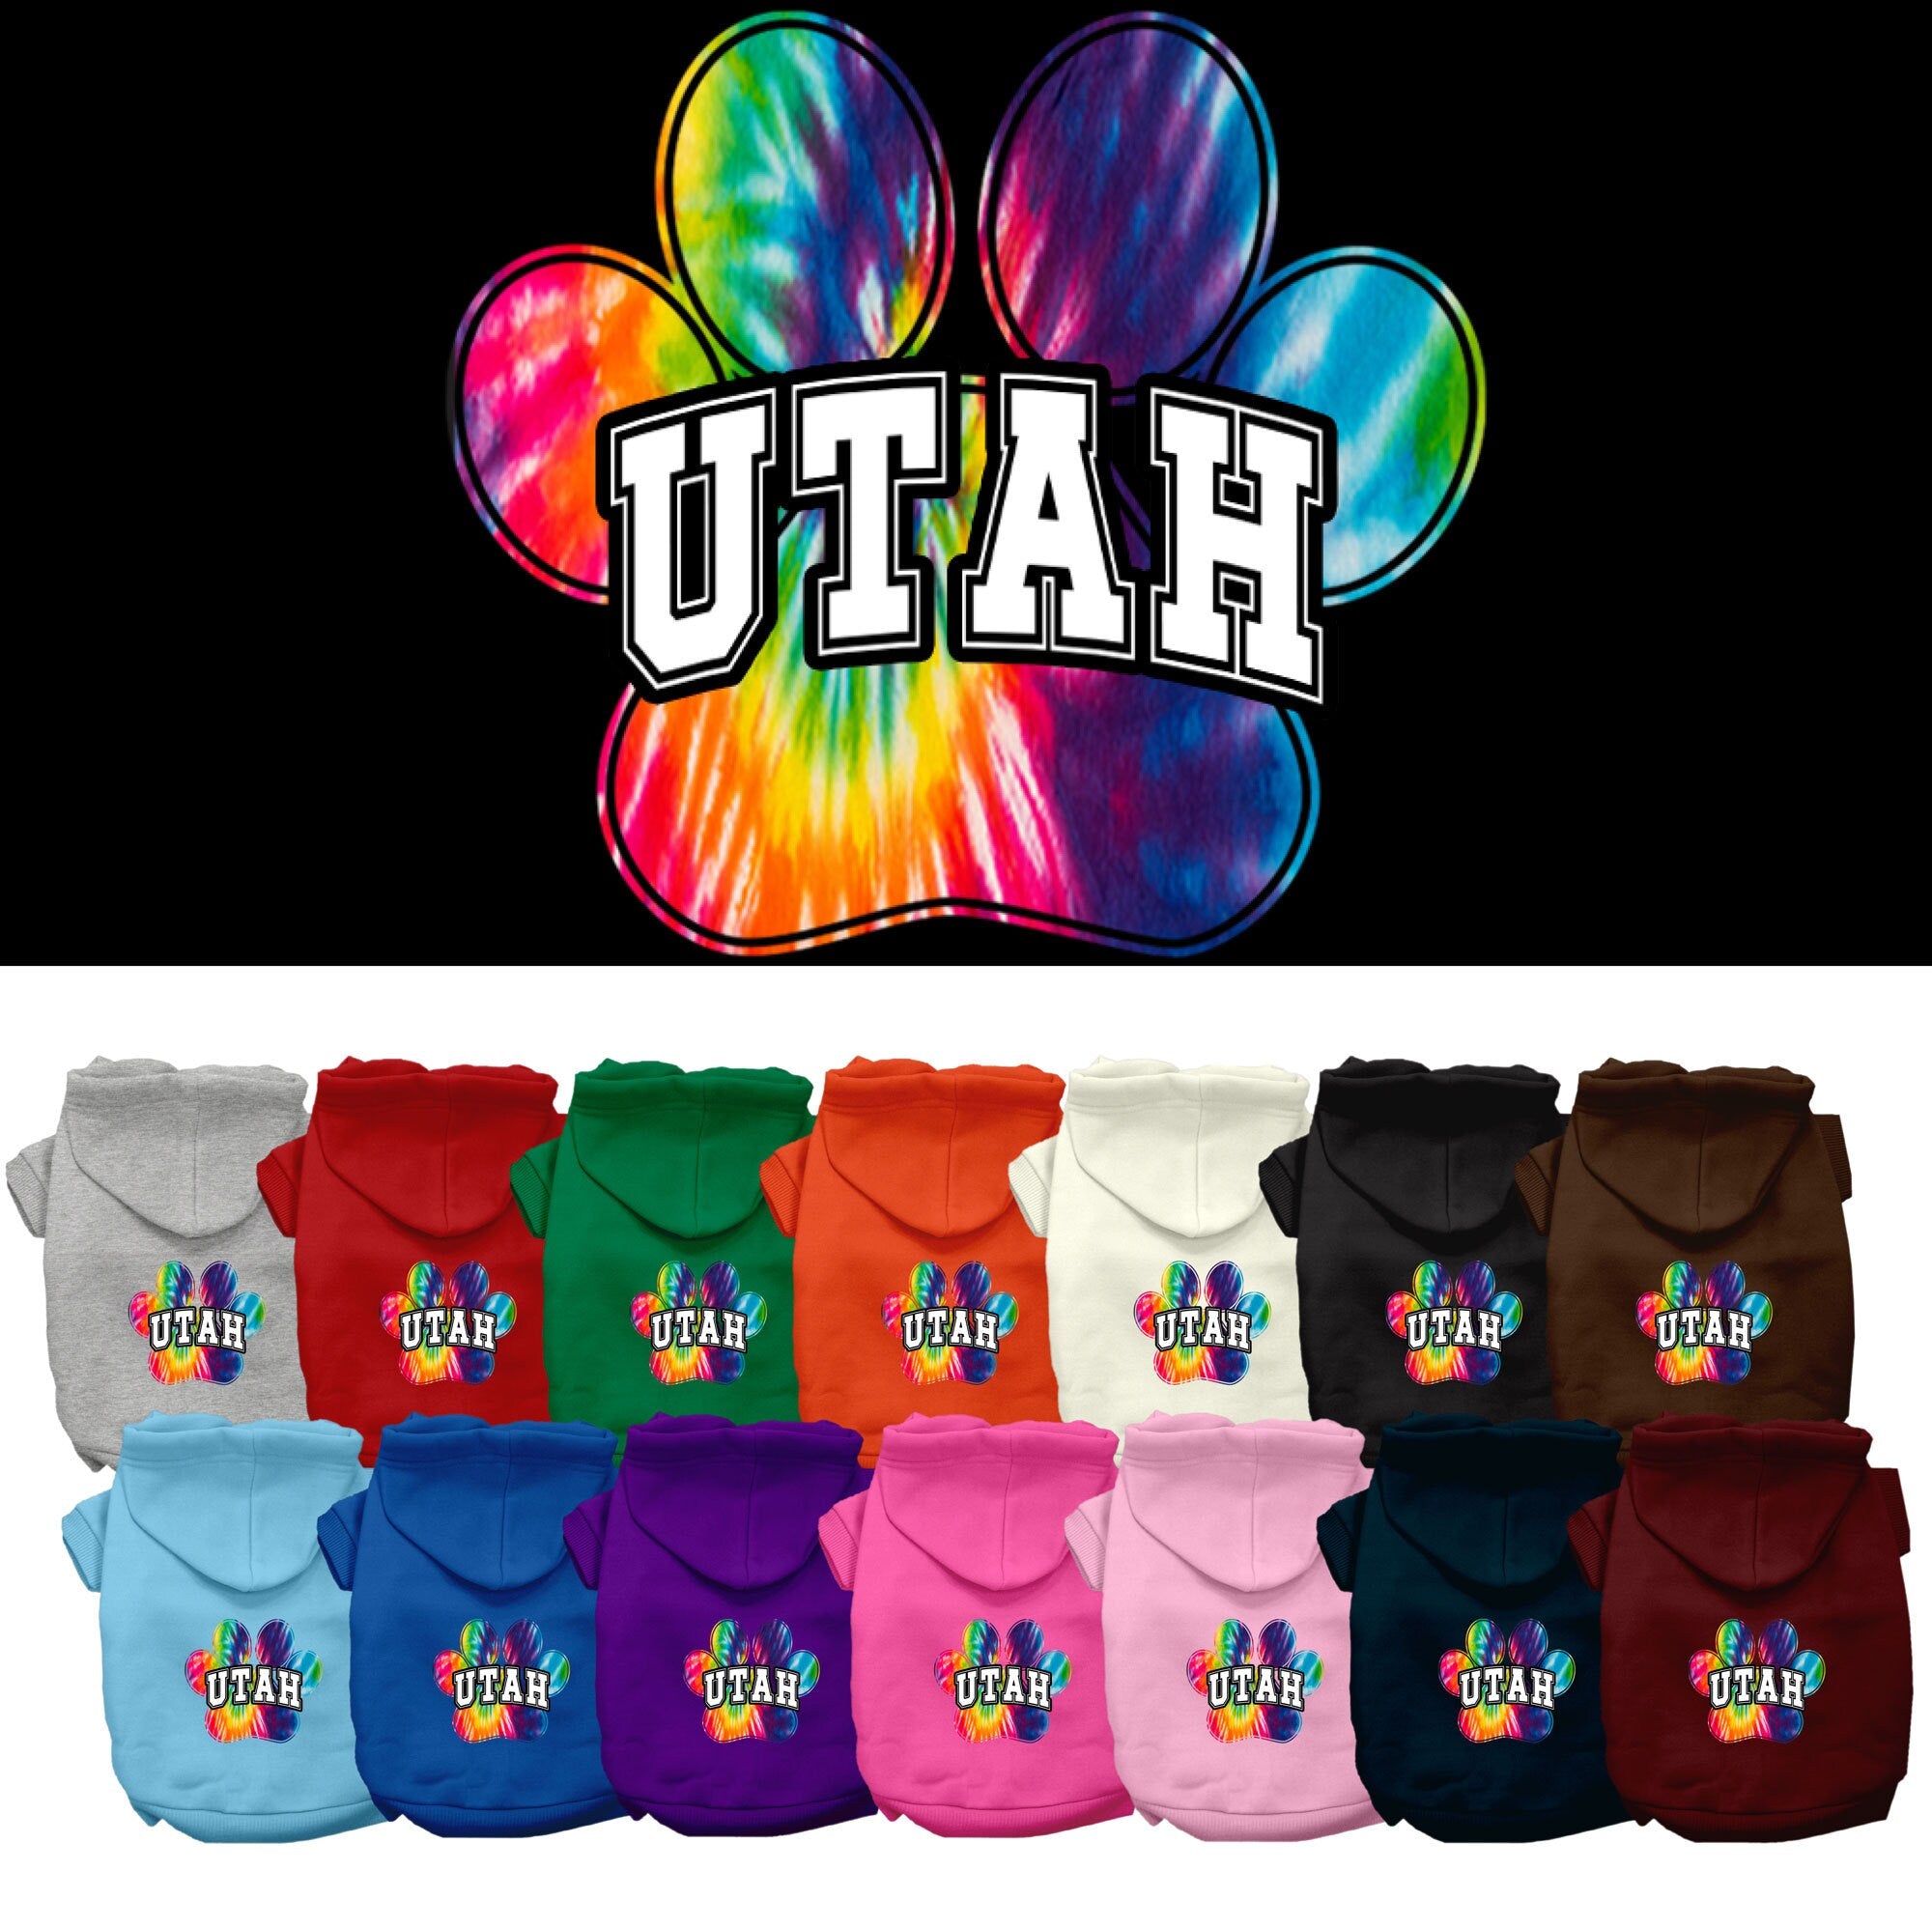 Pet Dog & Cat Screen Printed Hoodie for Medium to Large Pets (Sizes 2XL-6XL), &quot;Utah Bright Tie Dye&quot;